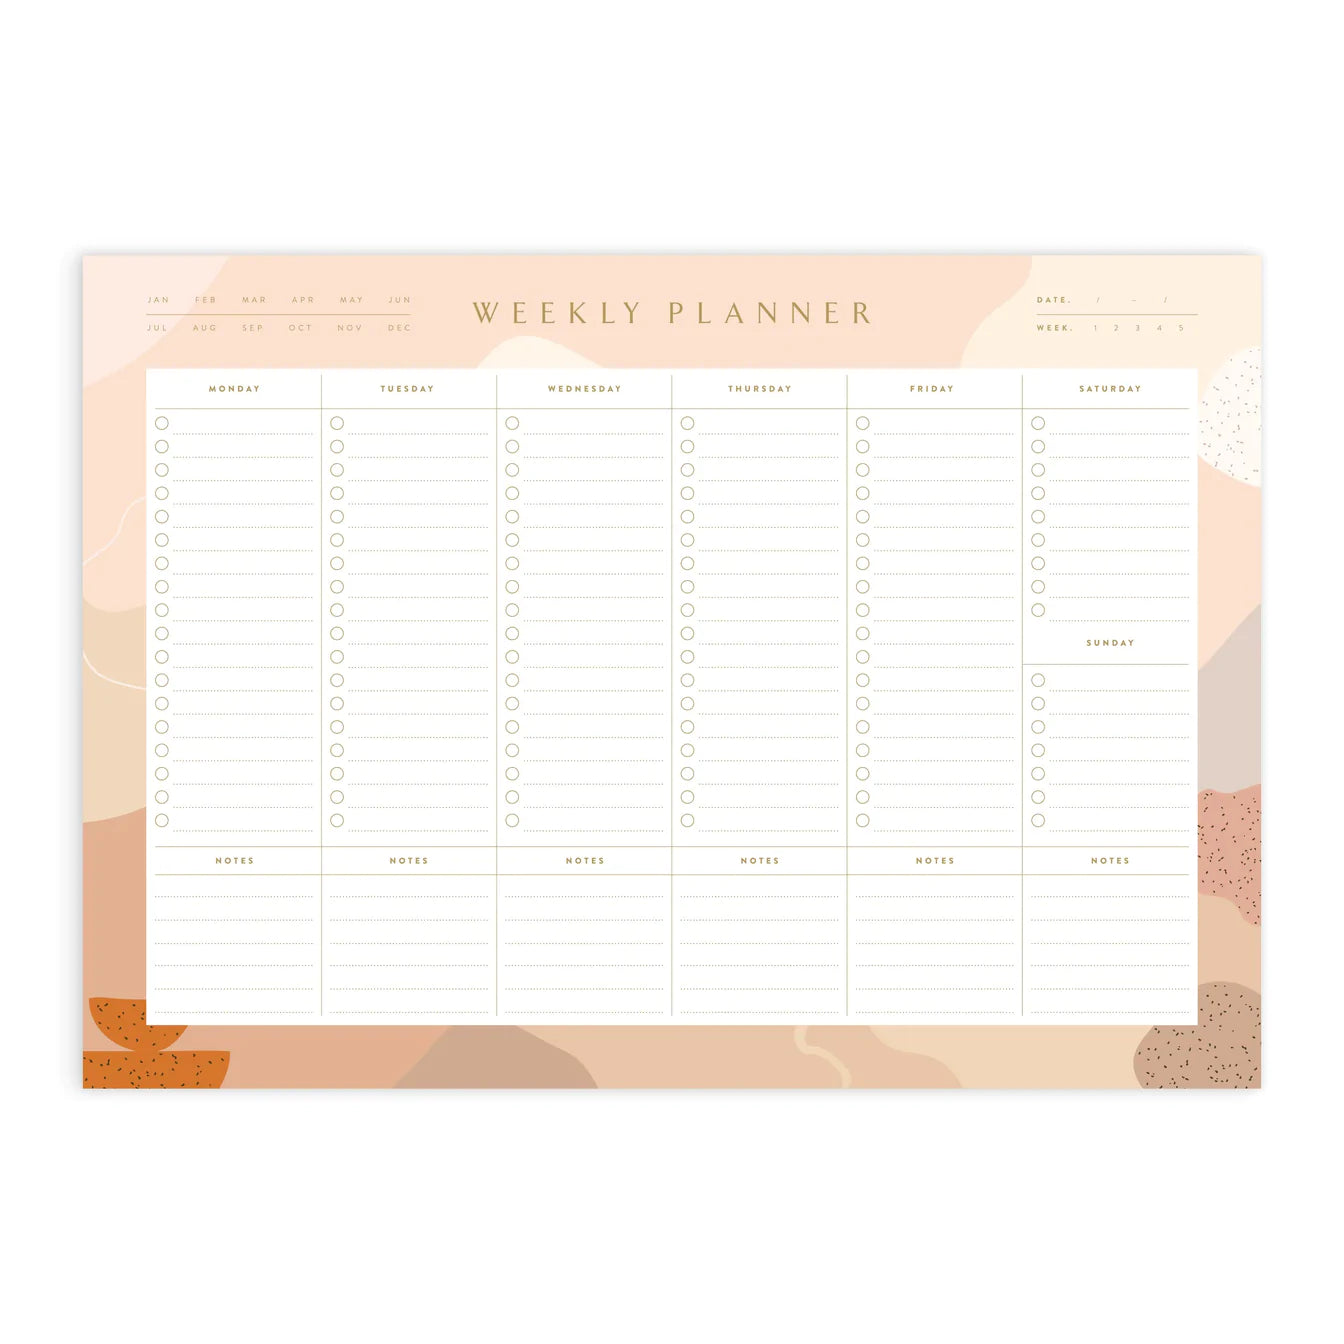 Still Life A4 Weekly Planner